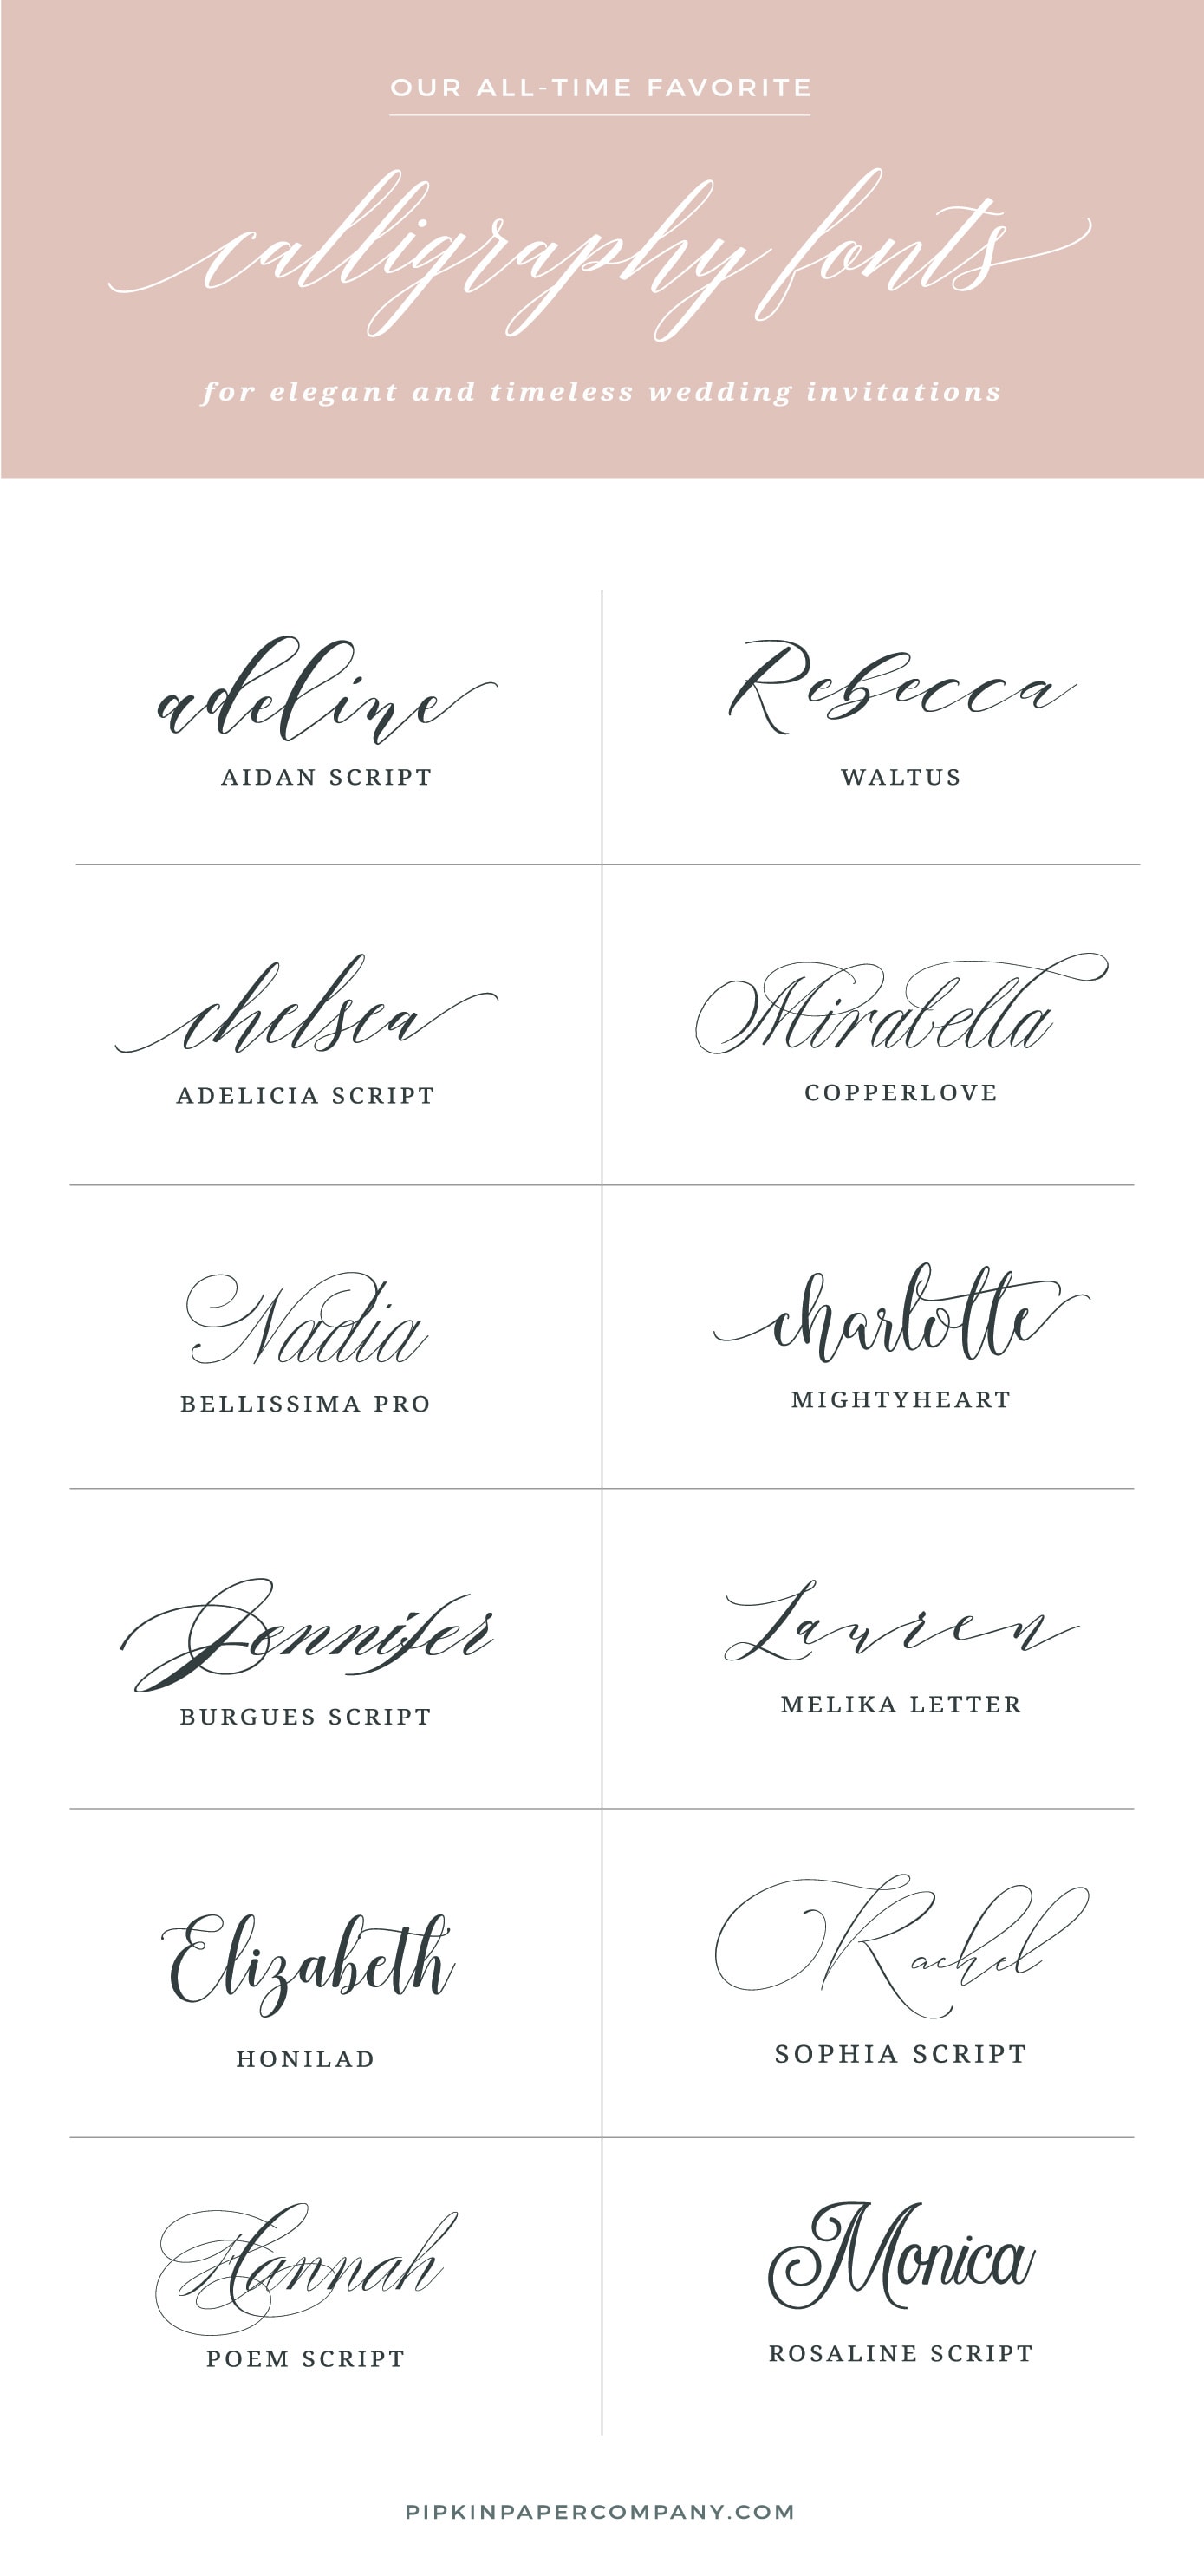 THE BEST FONTS FOR WEDDING INVITATIONS | Pipkin Paper Company